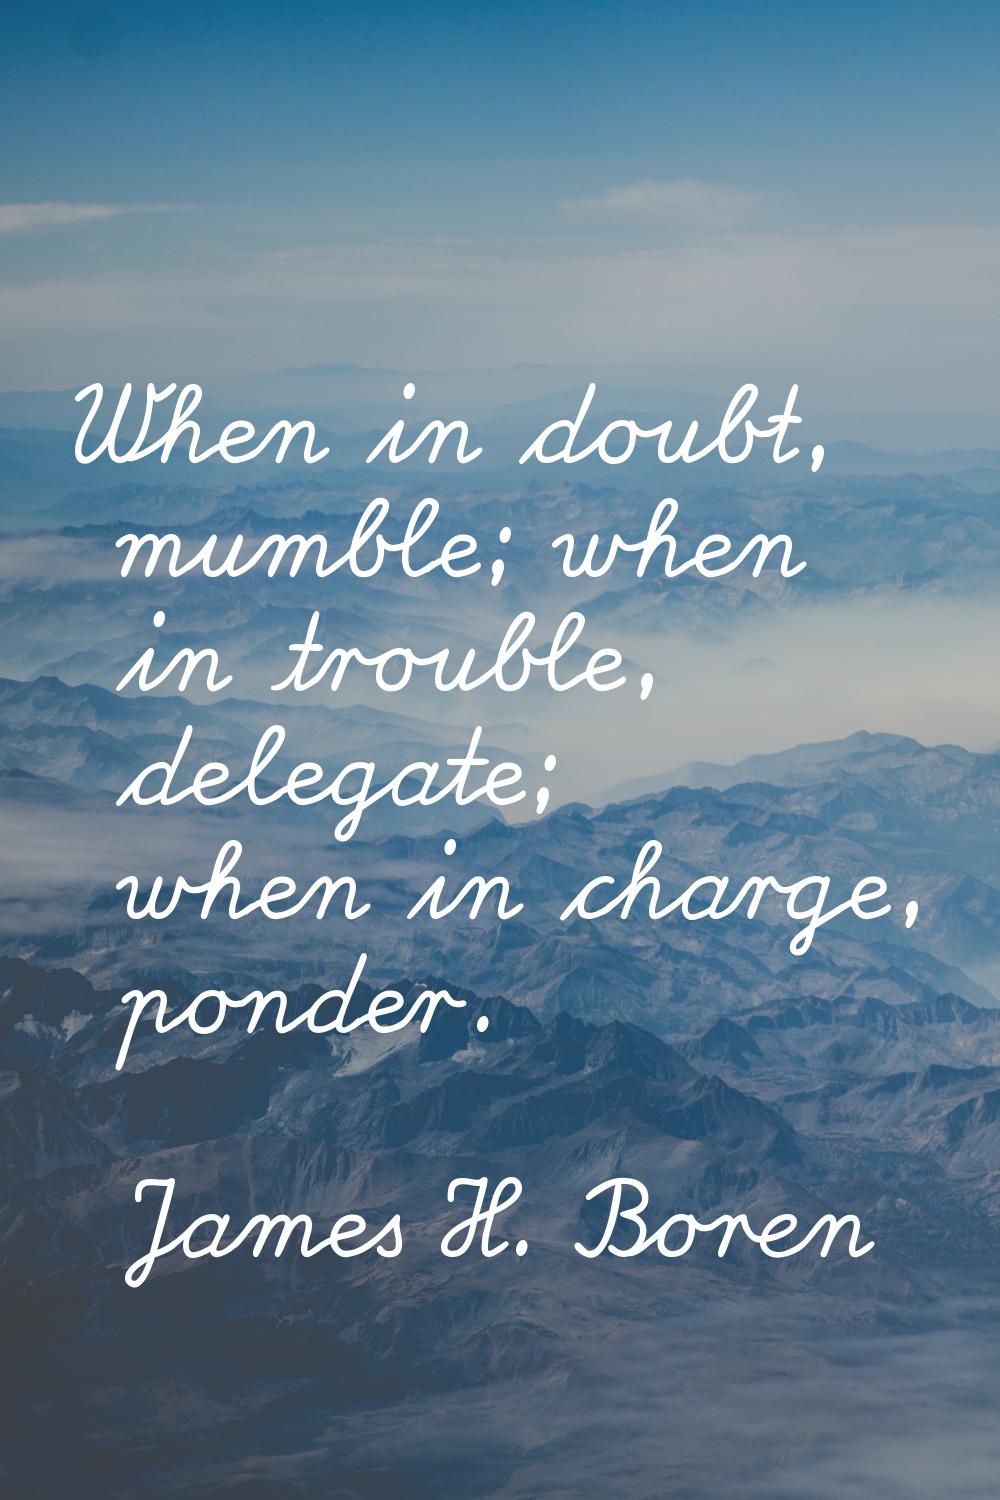 When in doubt, mumble; when in trouble, delegate; when in charge, ponder.